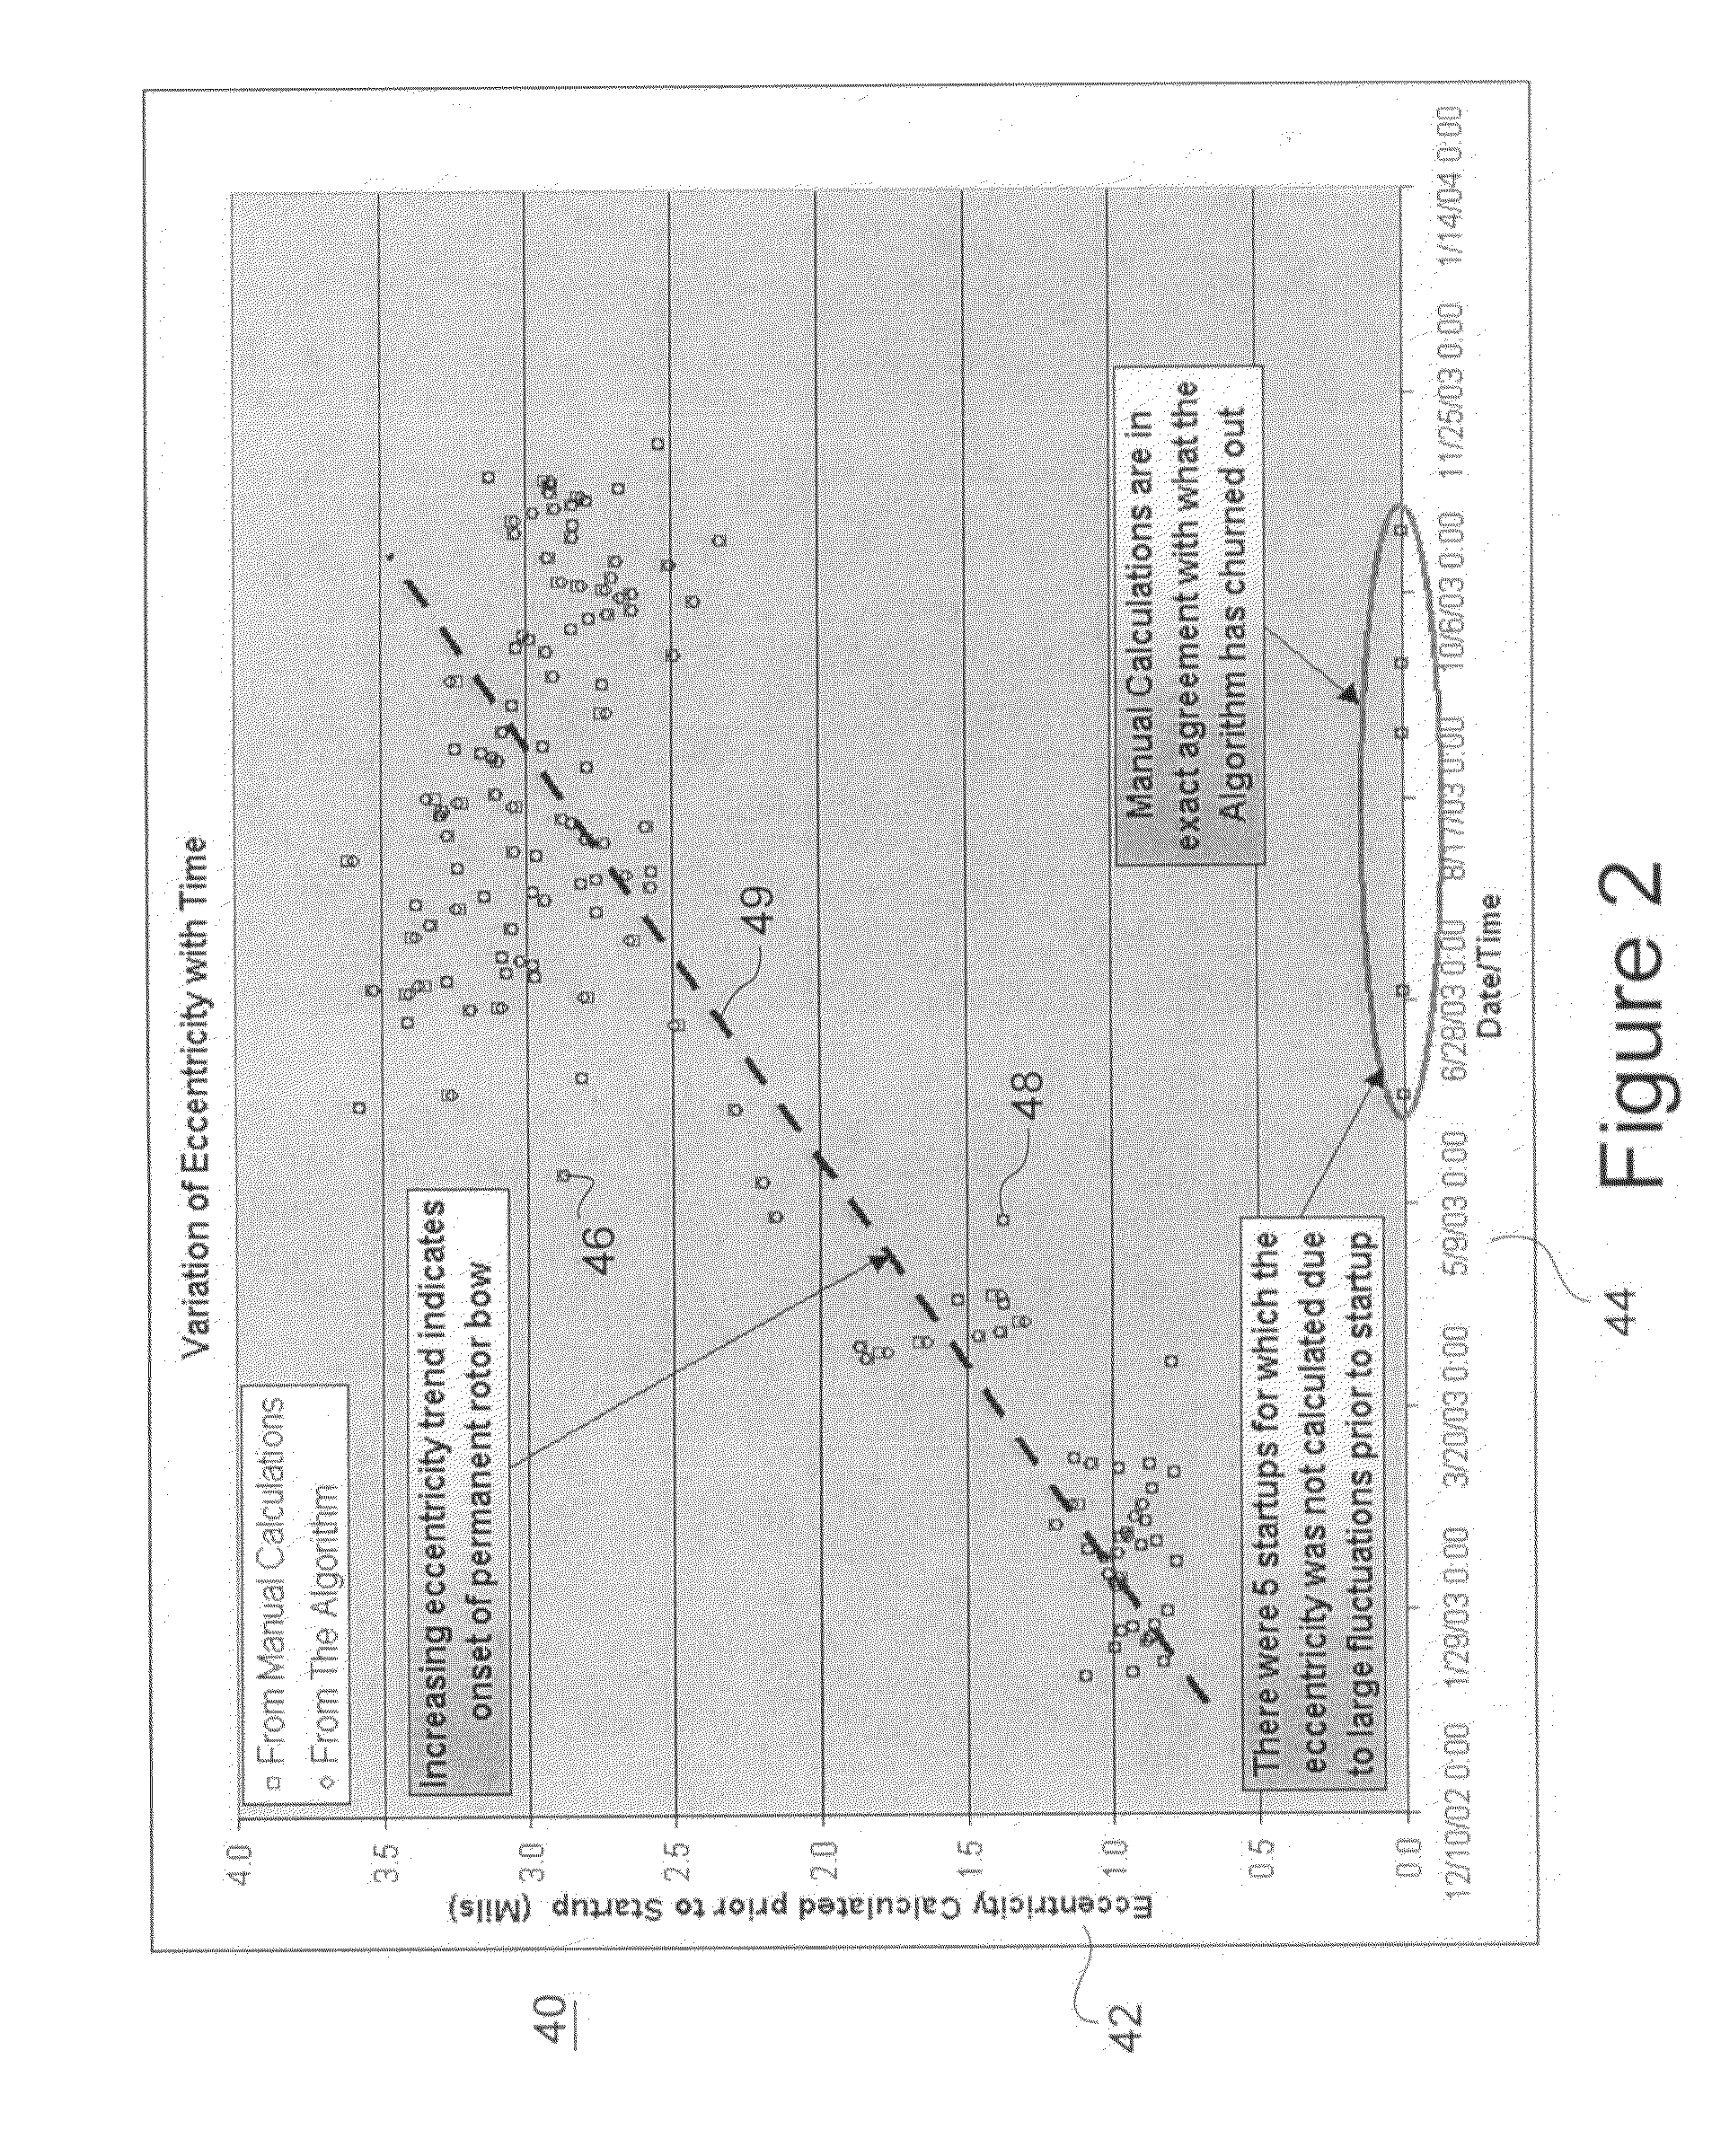 System and method for detection of rotor eccentricity baseline shift